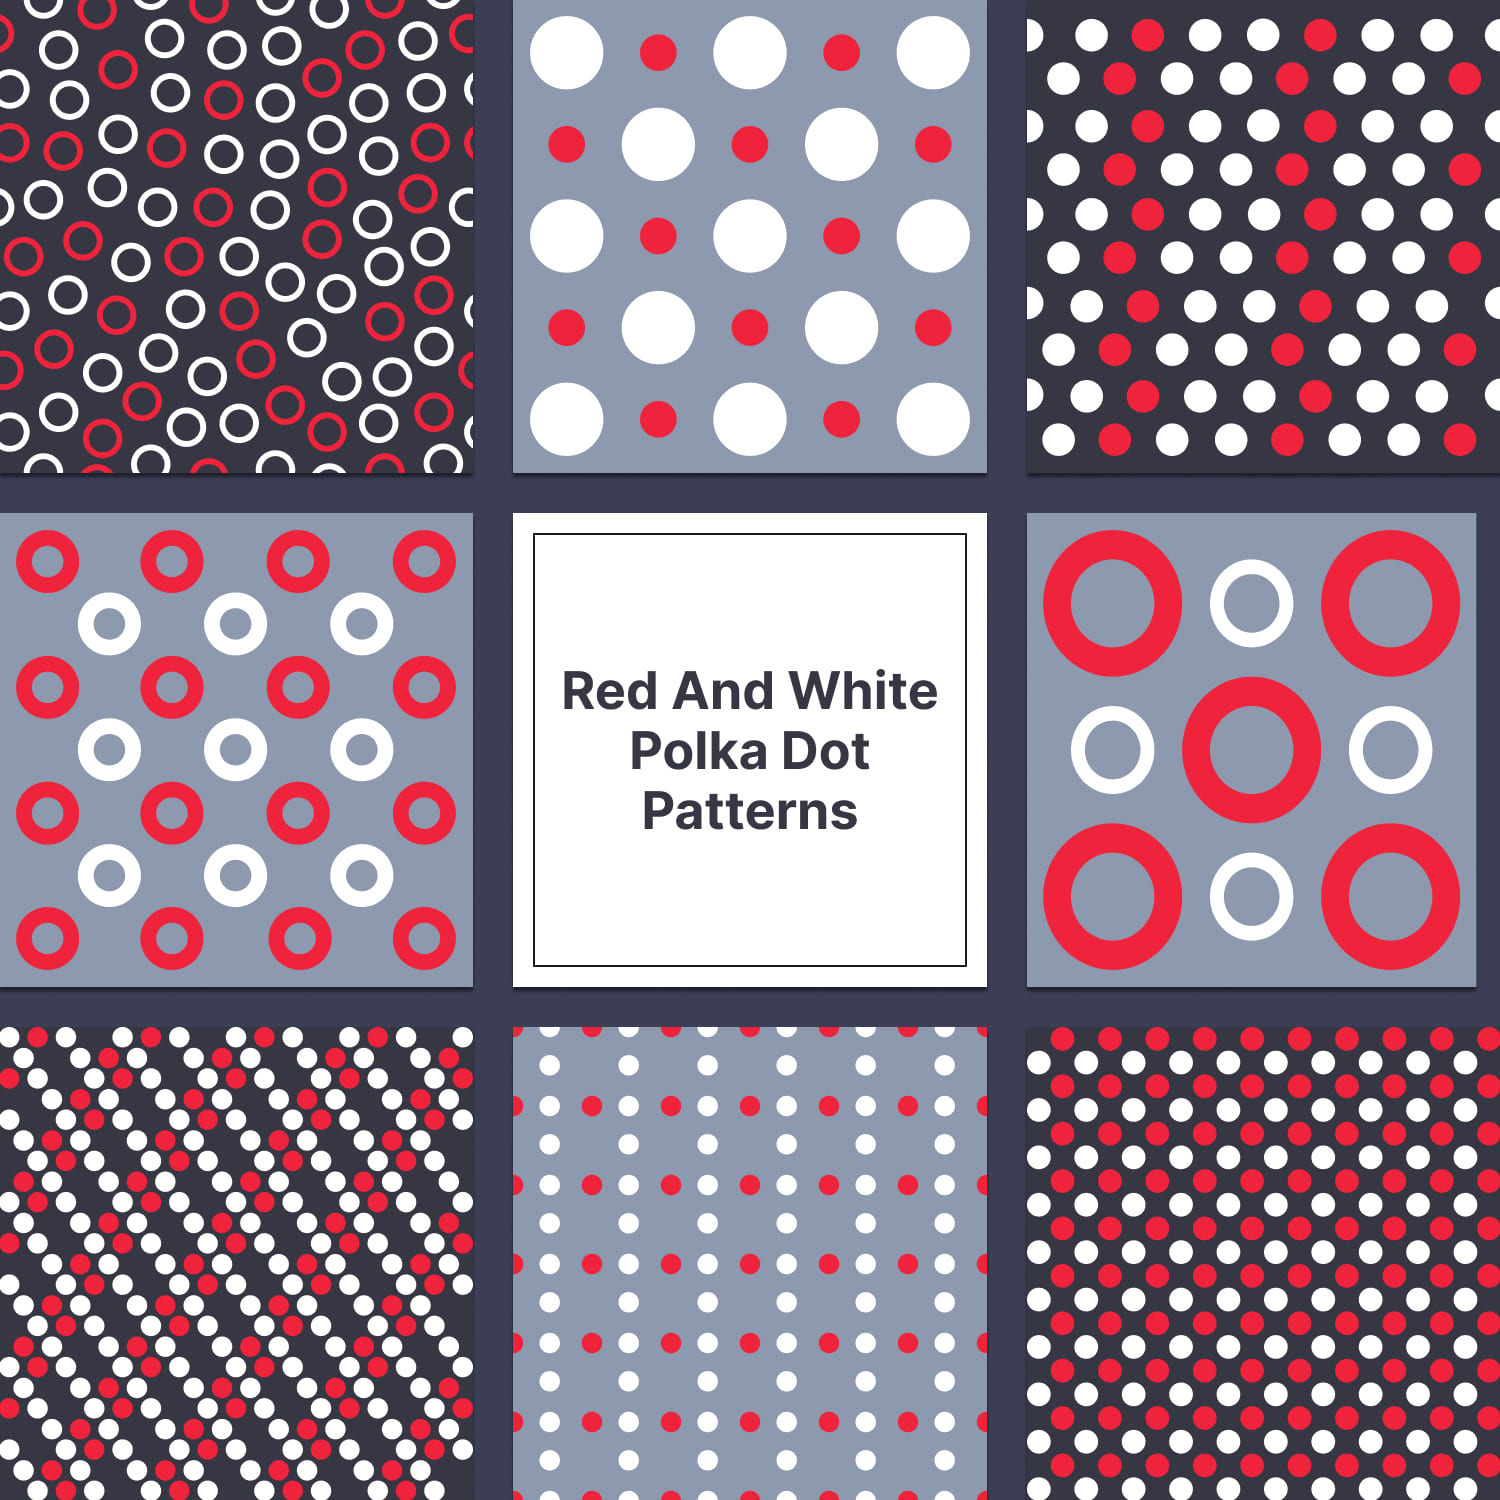 red and white polka dot patterns.